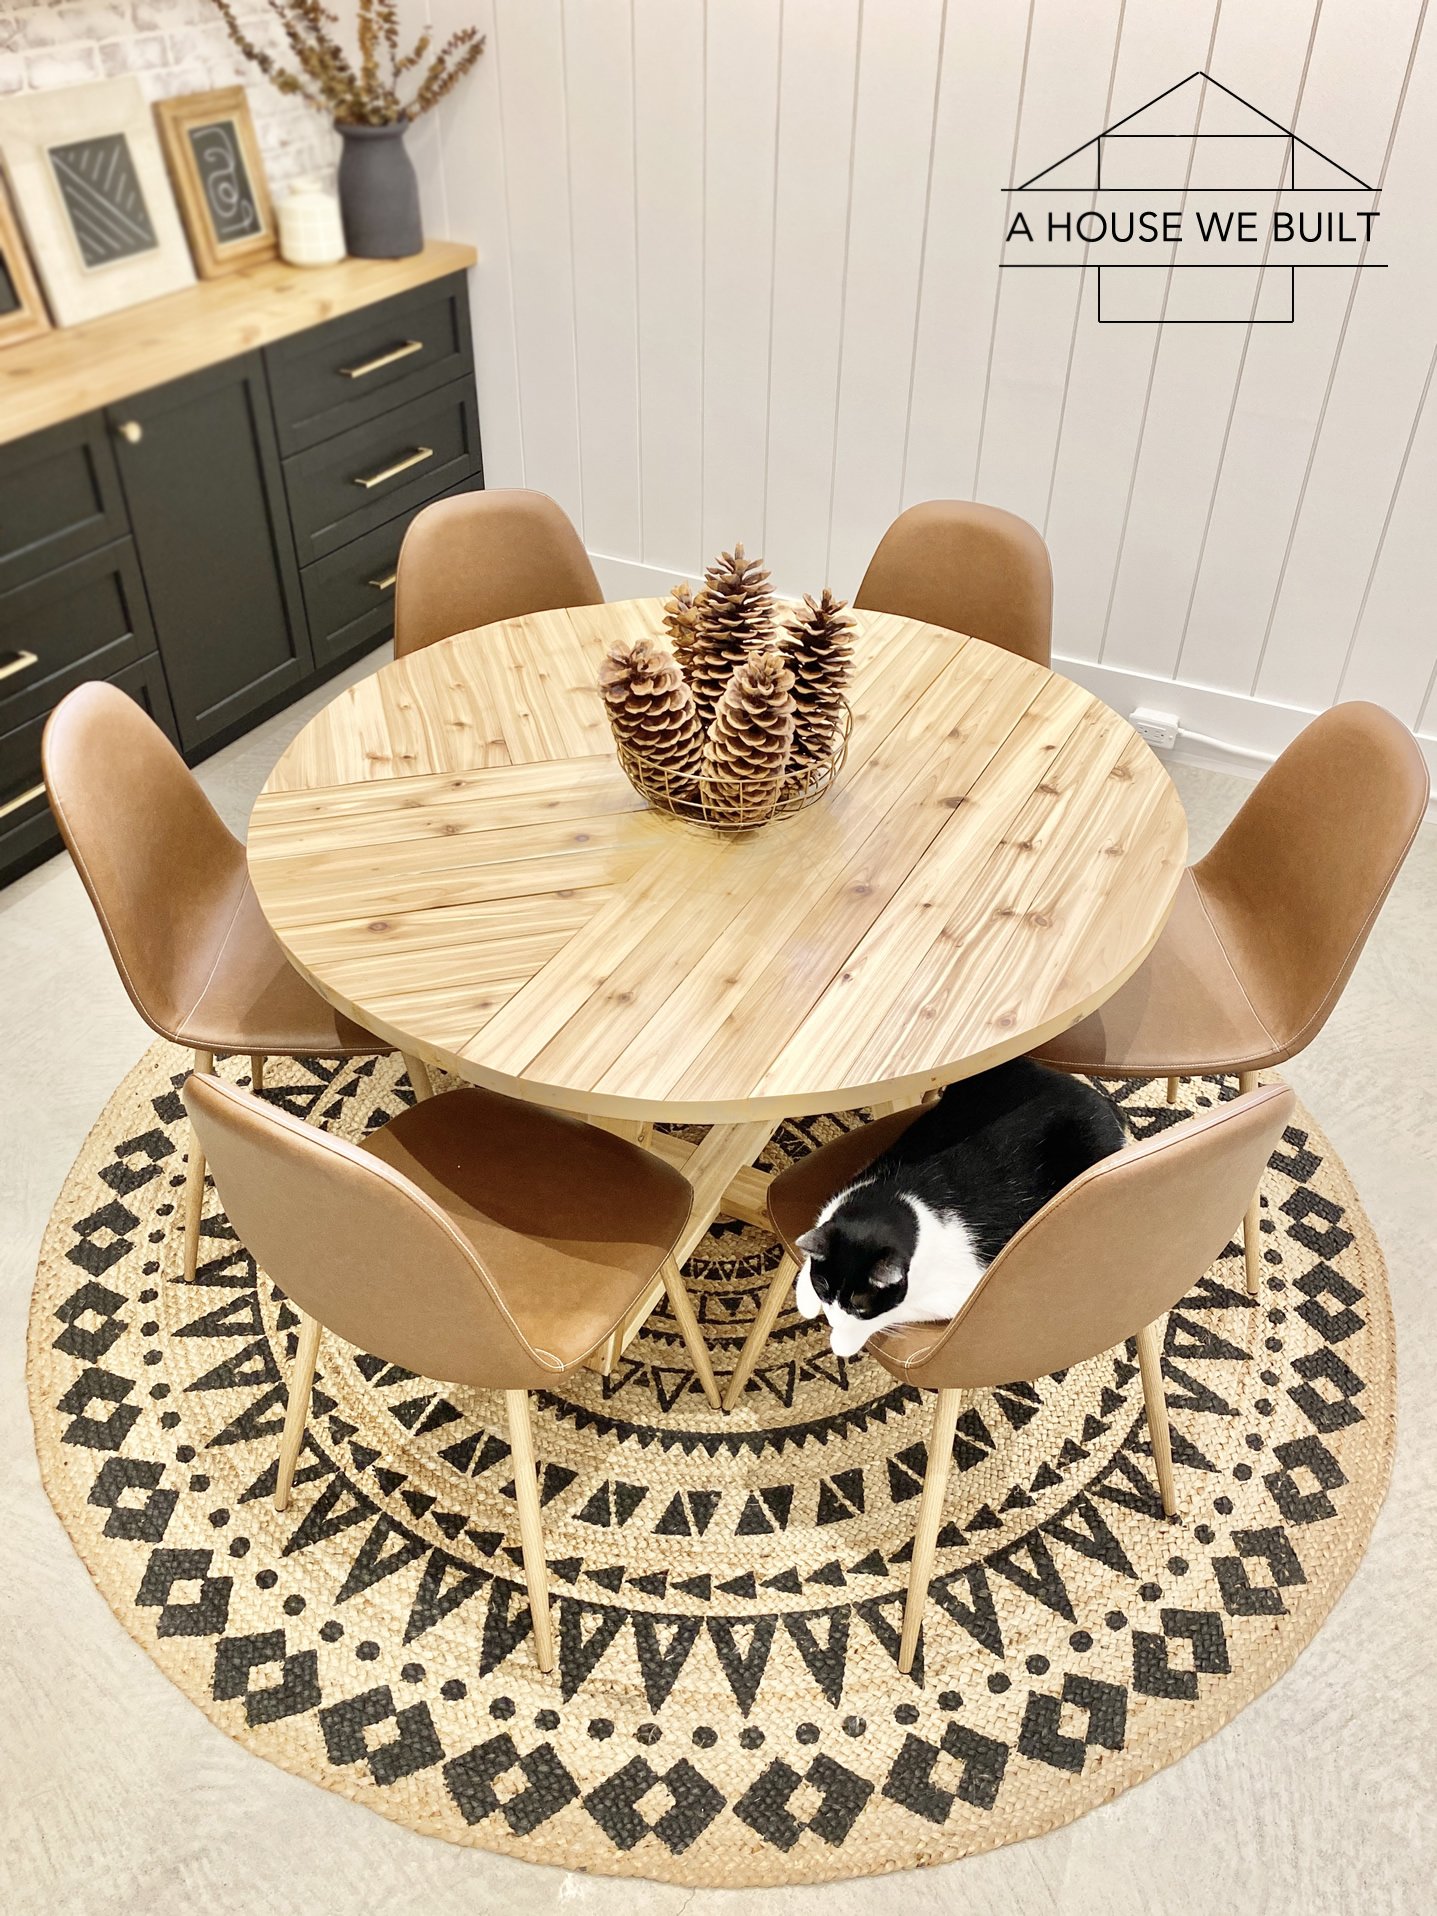 How To Build A Round Table, Round Table Diy Ideas